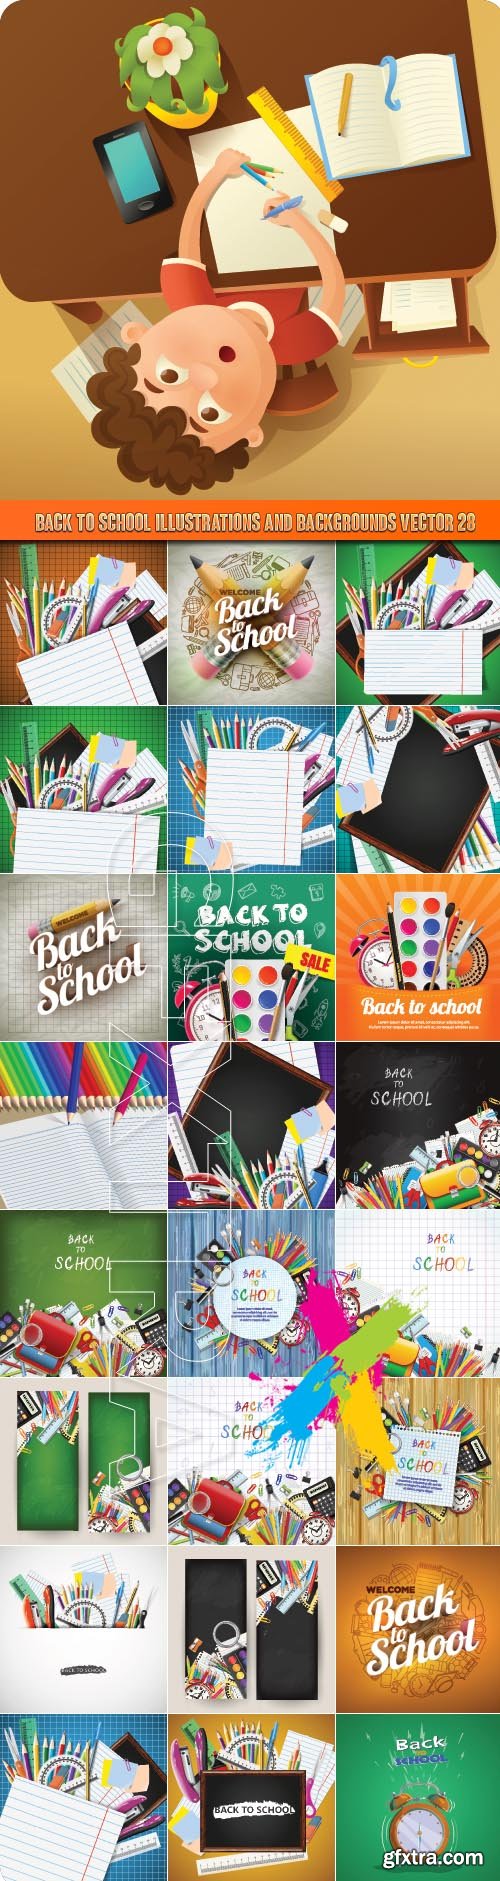 Back to school illustrations and backgrounds vector 28